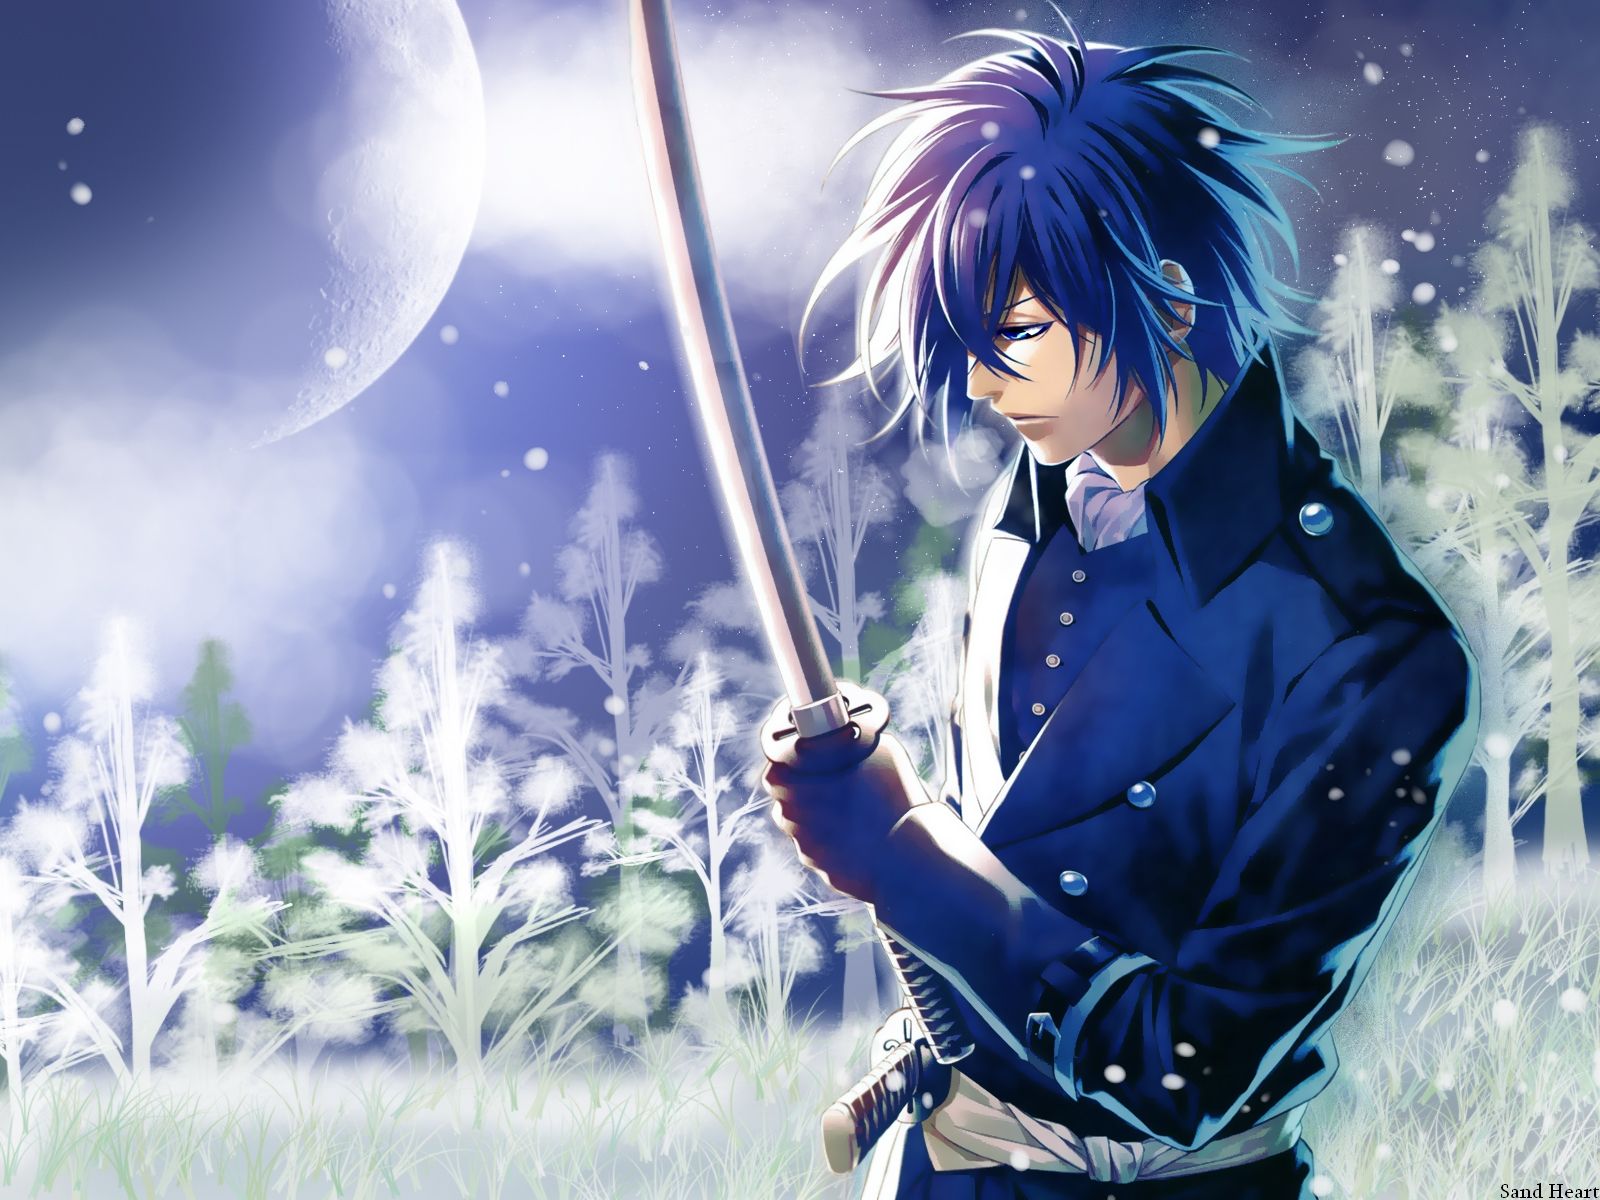 Cute Anime Boy with Blue Hair and Neko Features - wide 4